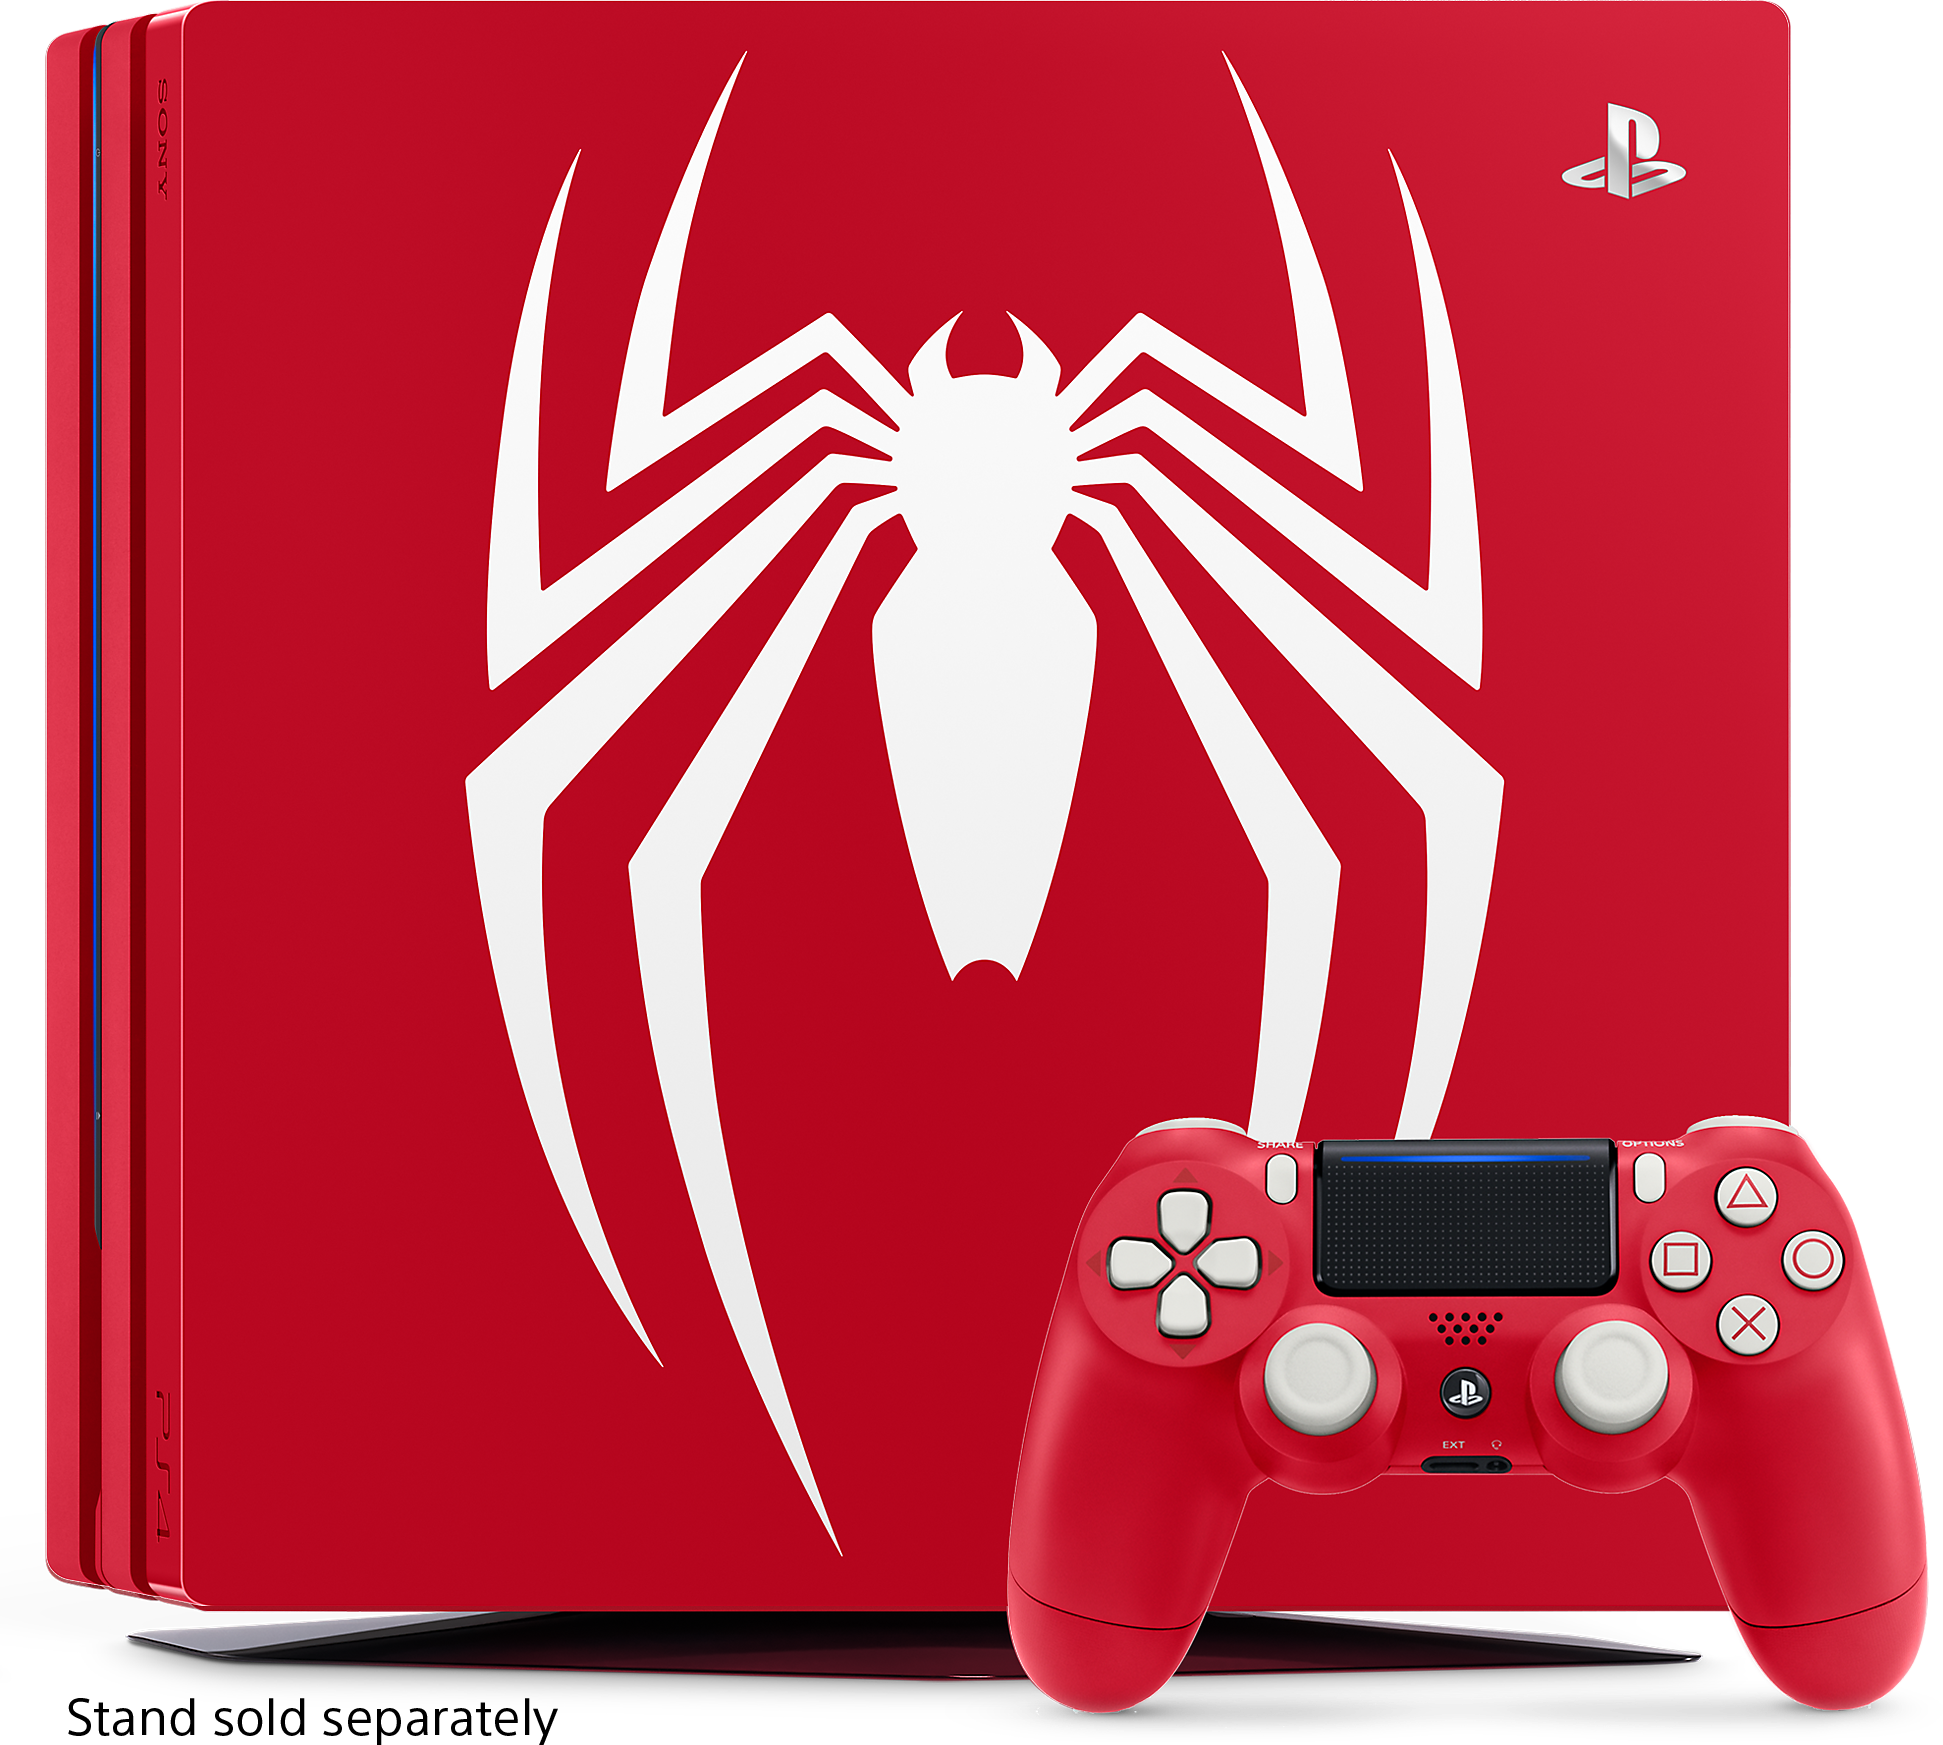 limited-edition-marvels-spider-man-ps4-pro-bundle-product-hero-01-ps4-us-18jul18